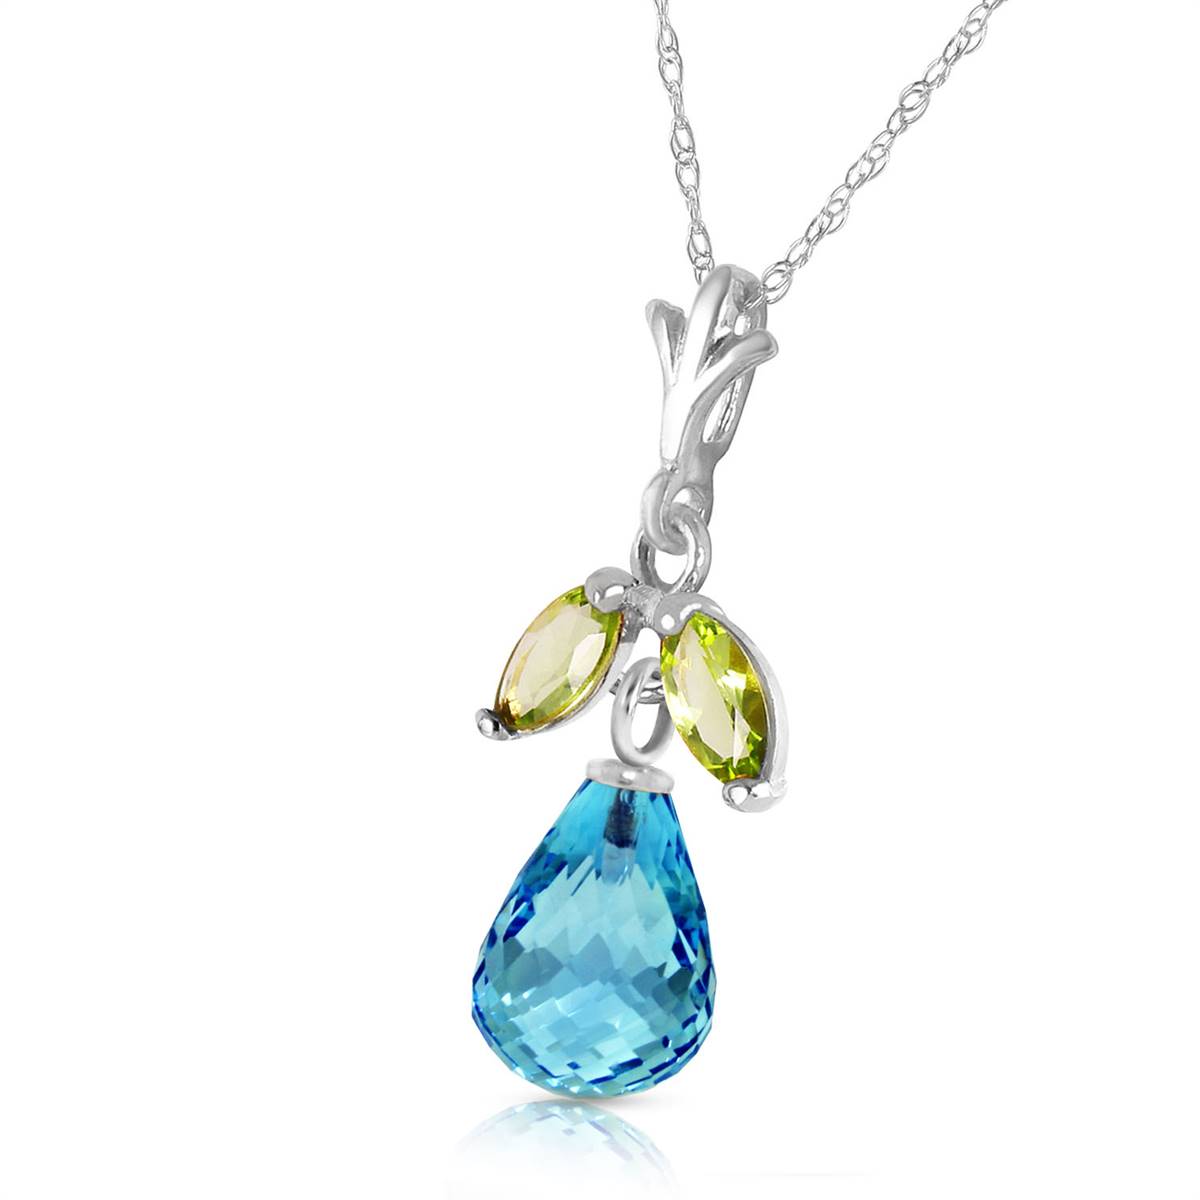 1.7 Carat 14K Solid White Gold Charm You Blind Blue Topaz Peridot Necklace